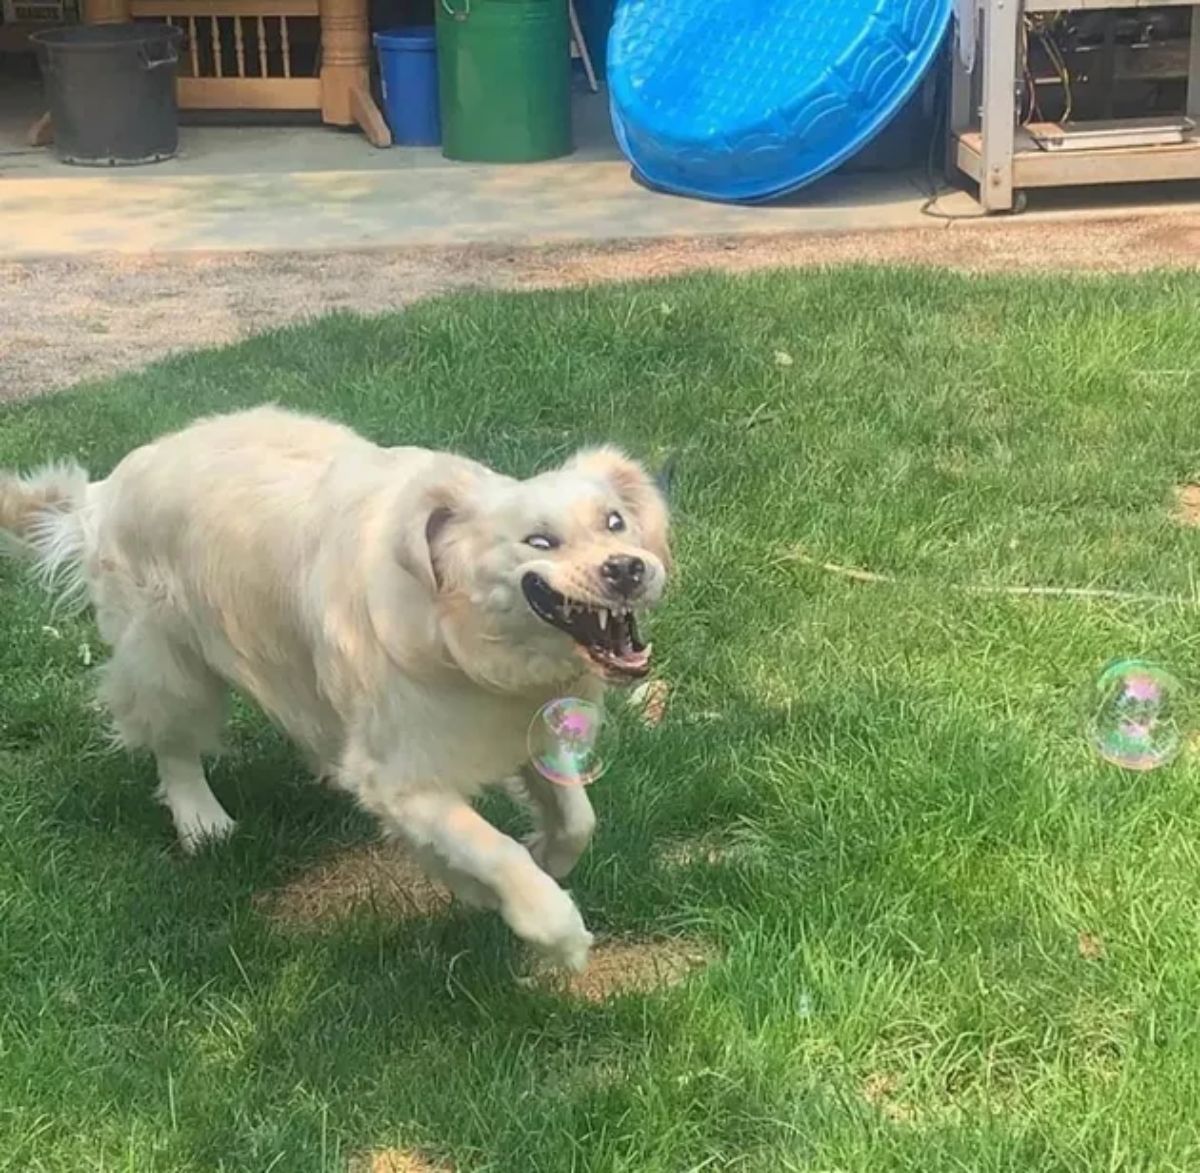 golden retriever running on grass trying to catch bubbles